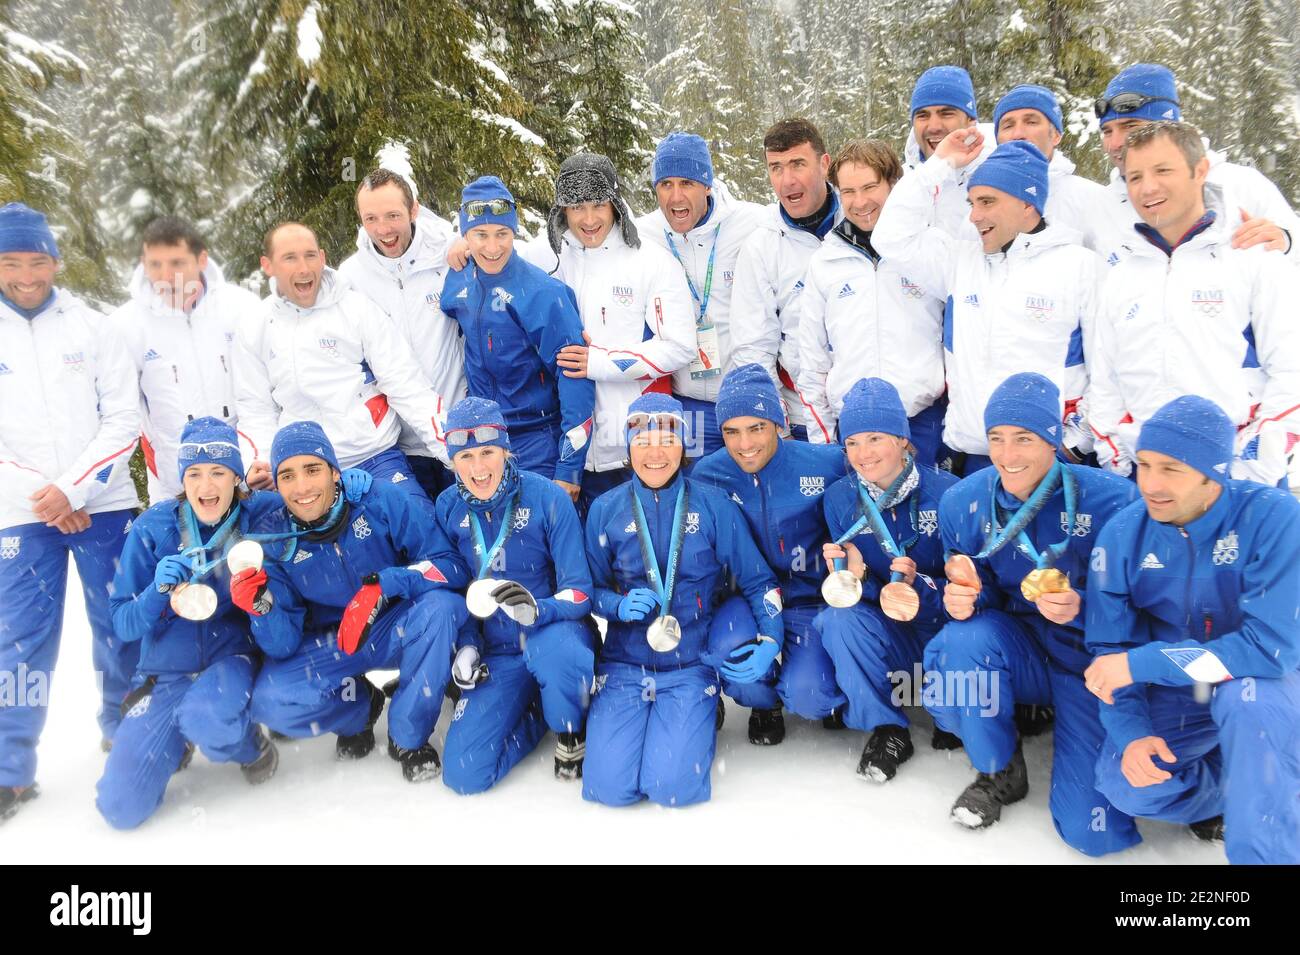 France's Biathlon team and coaches pose with their medals after the last Biathlon competition for the Vancouver 2010 XXI Olympic Winter Games at Olympic Park in Whistler, Canada on February 26, 2010. Photo by Gouhier-Hahn-Nebinger/ABACAPRESS.COM Stock Photo